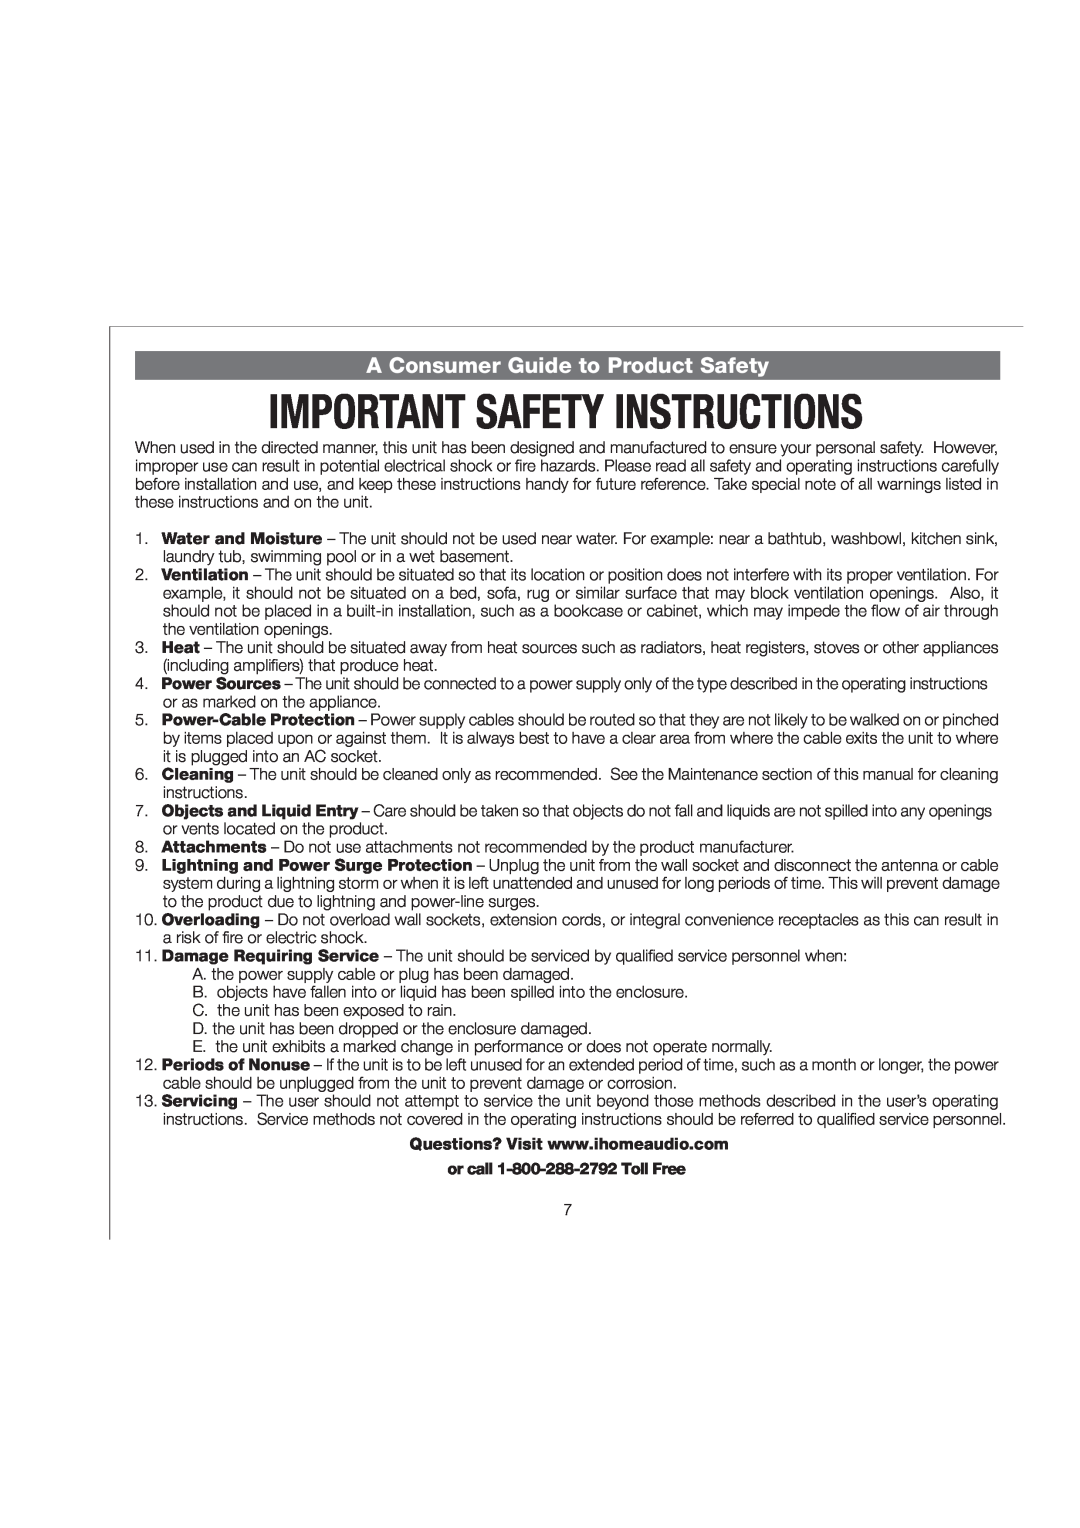 iHome IP48 manual A Consumer Guide to Product Safety 